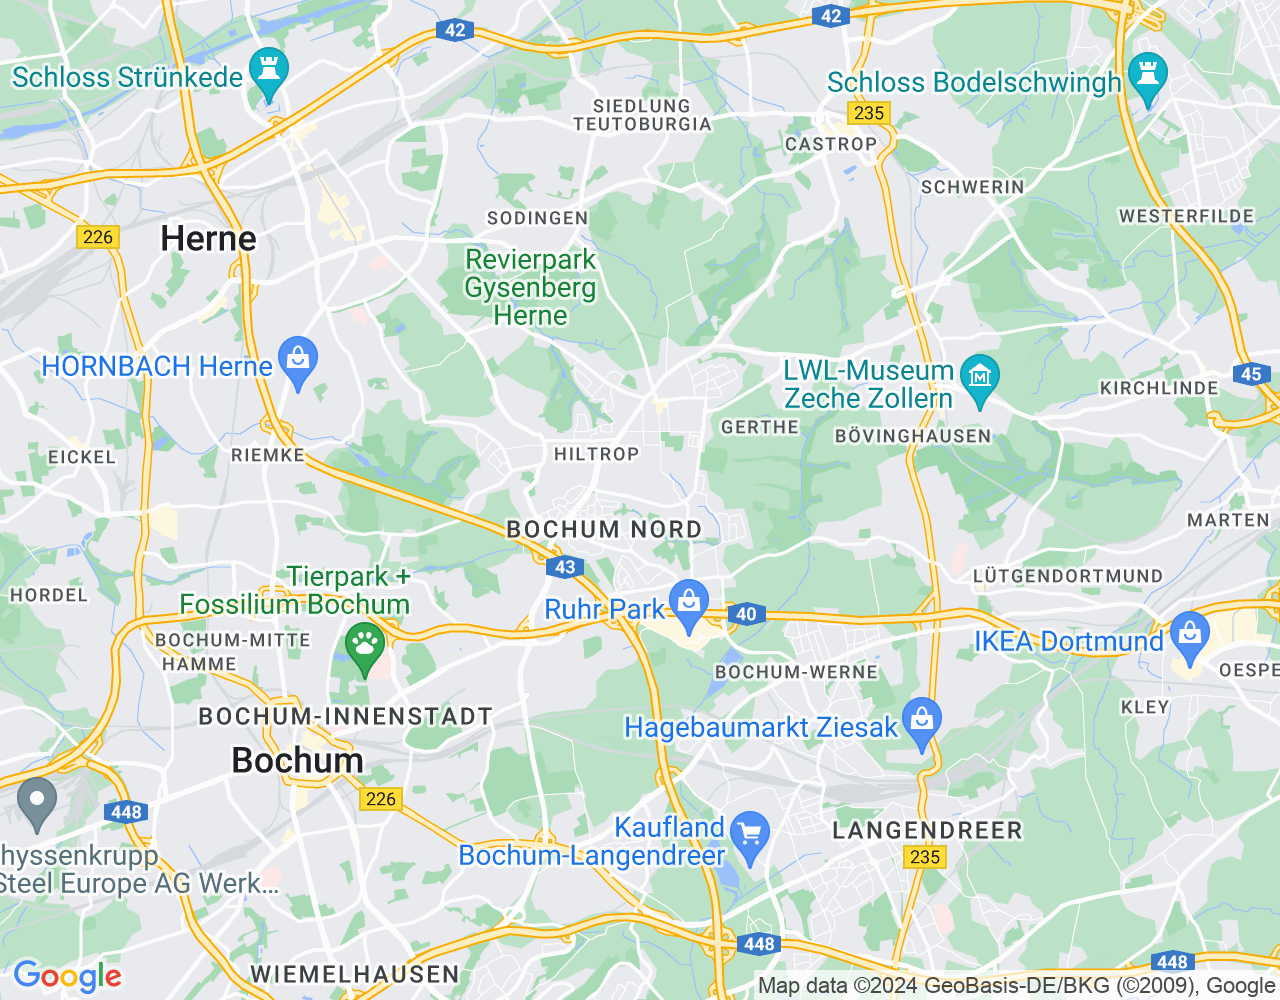 Google maps preview image